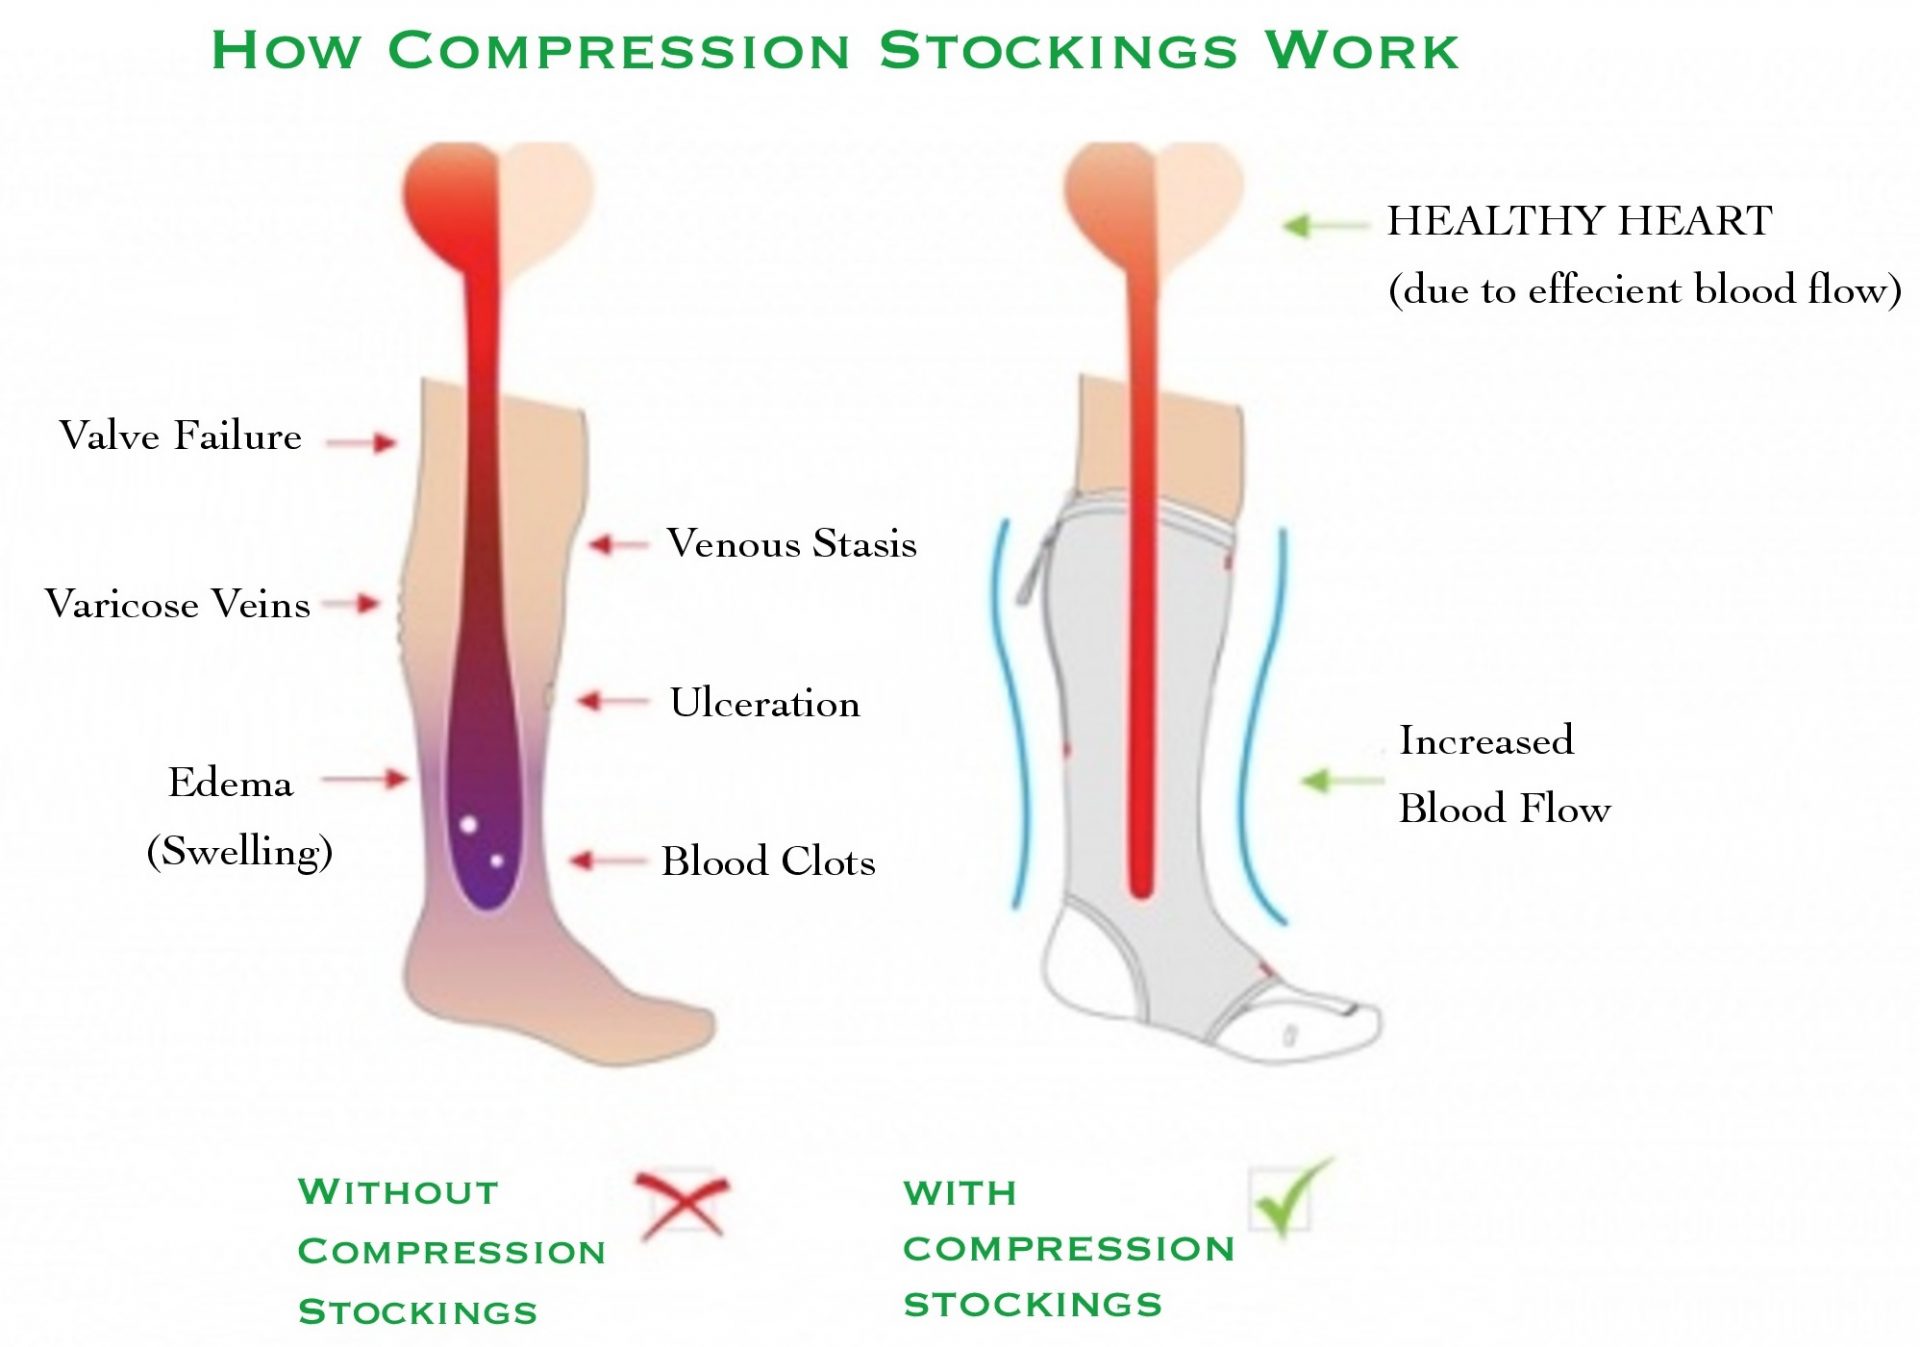 Vascular Recovery: Aftercare & Compression Stockings for Varicose